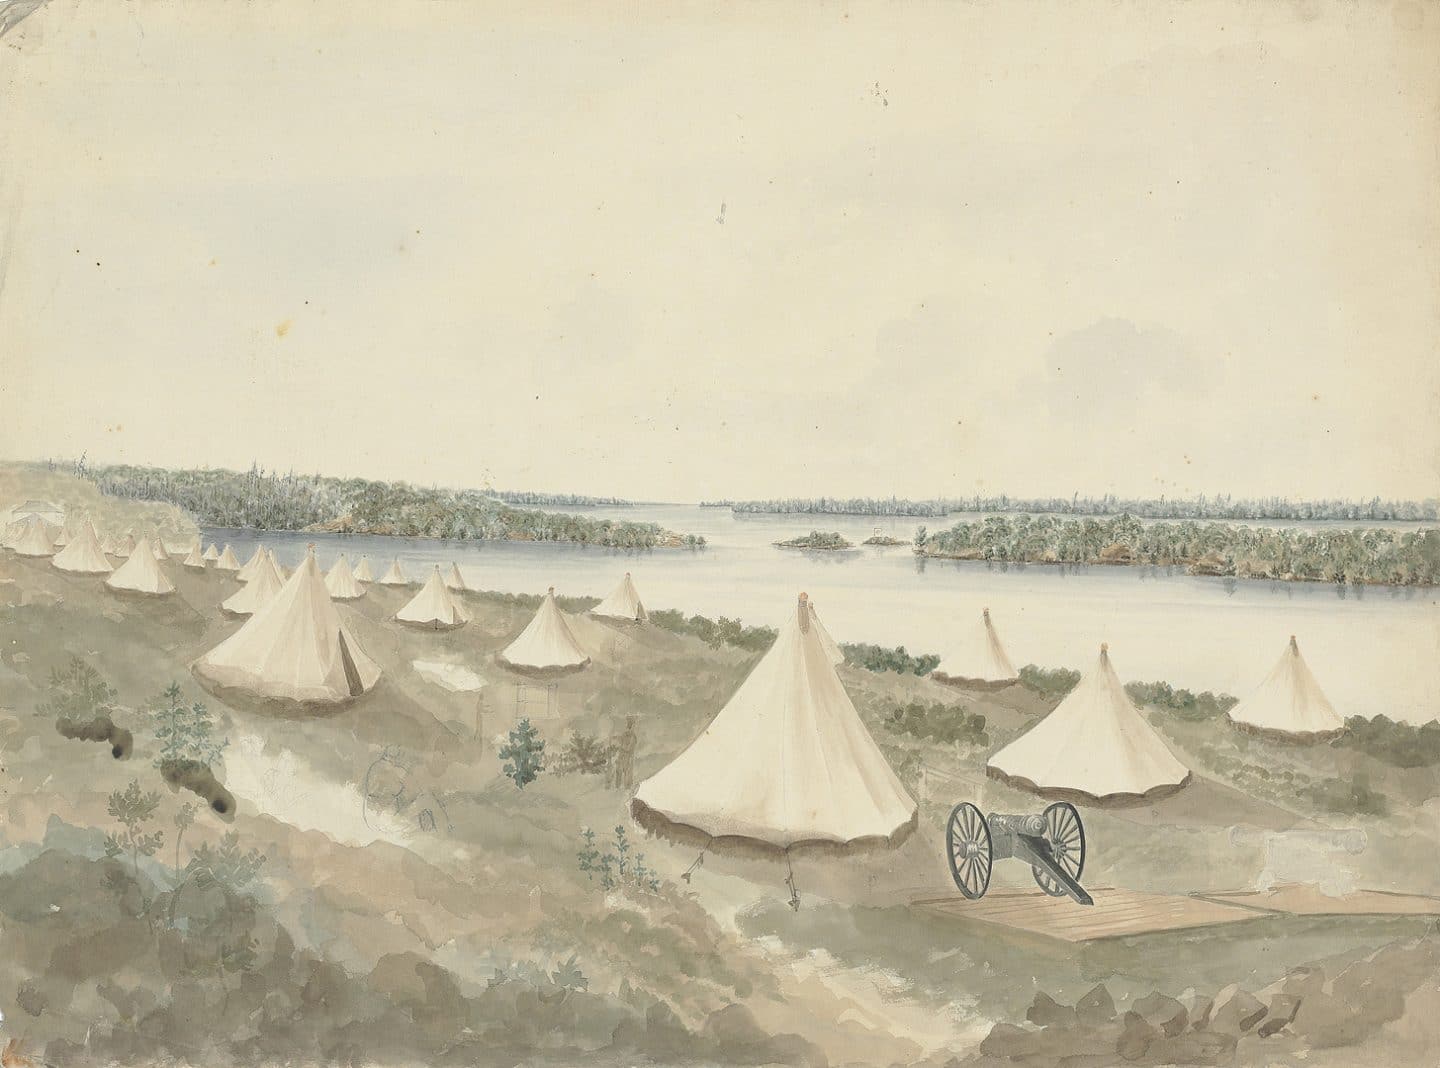 Charles Frederick Gibson, The Royal Artillery Encampment at Kingston, around 1832, pencil and watercolour on paper. Purchase, Chancellor Richardson Memorial Fund, Donald Murray Shepherd Fund, Susan M. Bazely, John Grenville, Brian S. Osborne and Joan M. Schwartz, 2016 (59-014.02)